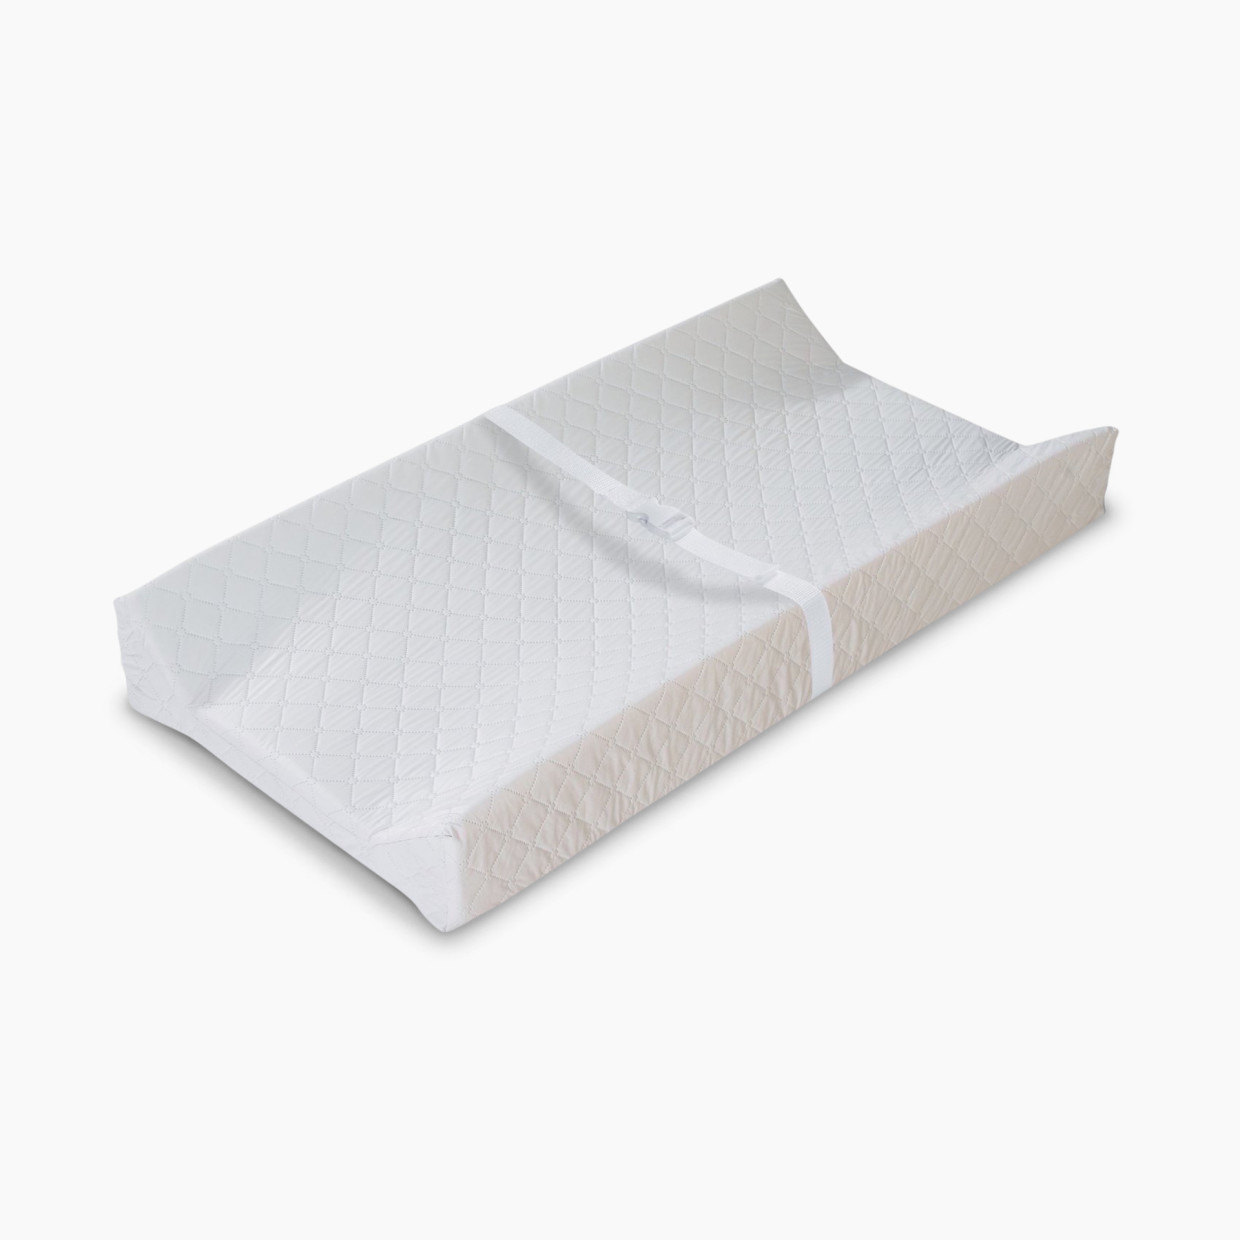 Summer 2-Sided Changing Pad.